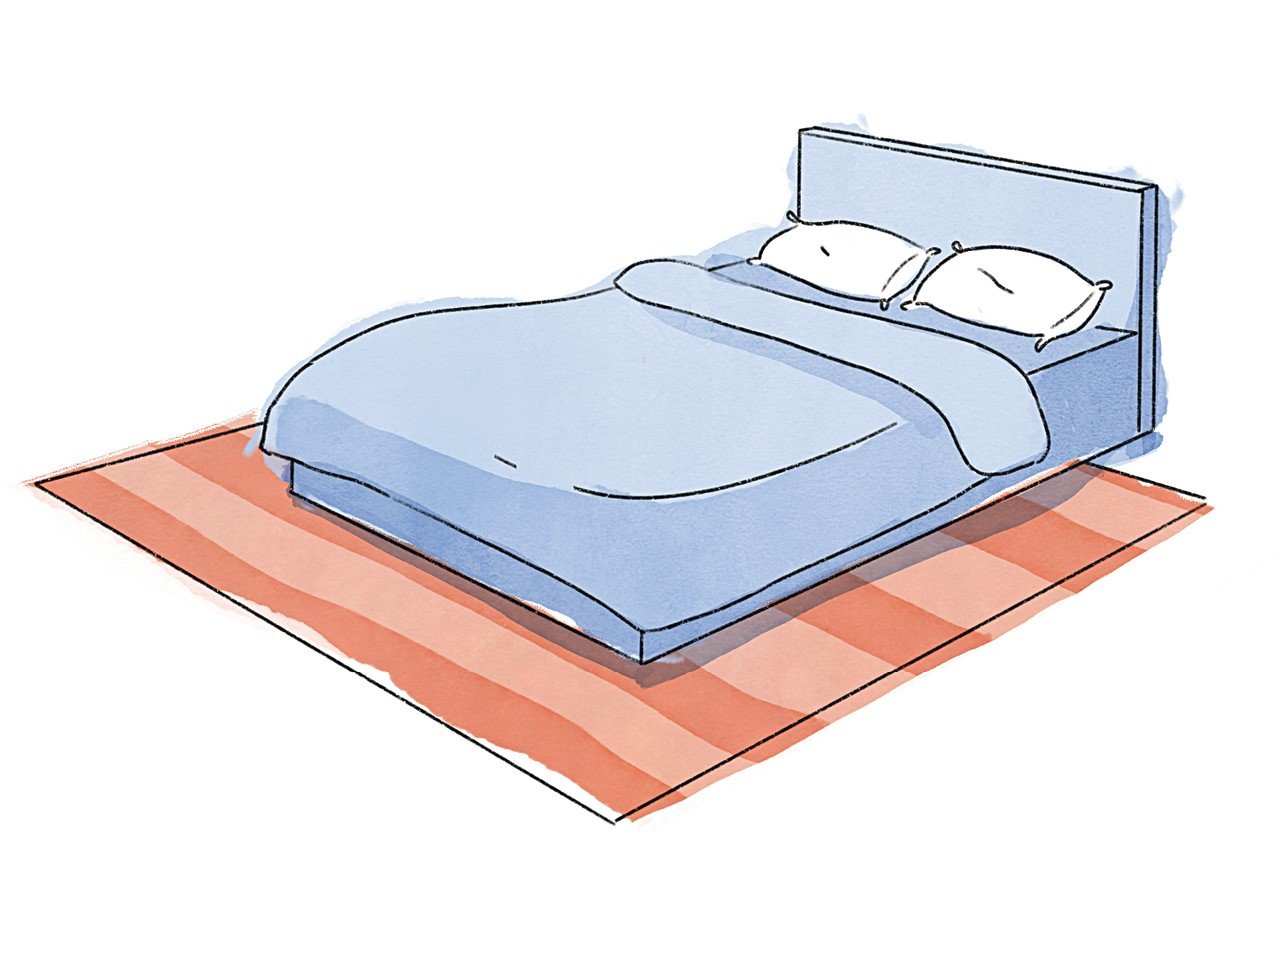 rug size buying guide illustration of a blue double bed with white pillows on a peach striped rug